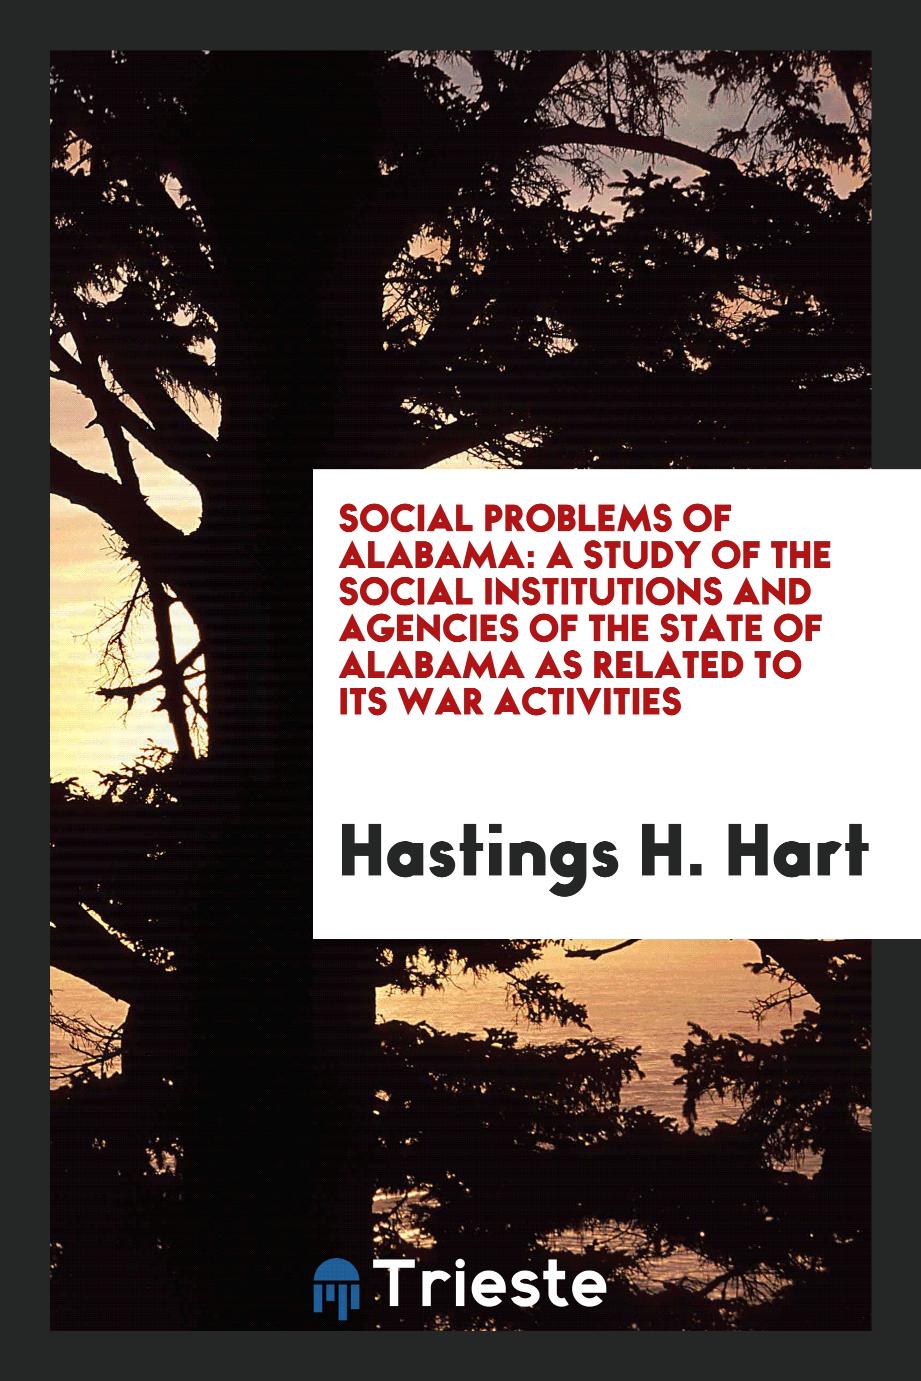 Social Problems of Alabama: A Study of the Social Institutions and Agencies of the State of Alabama as related to its war activities